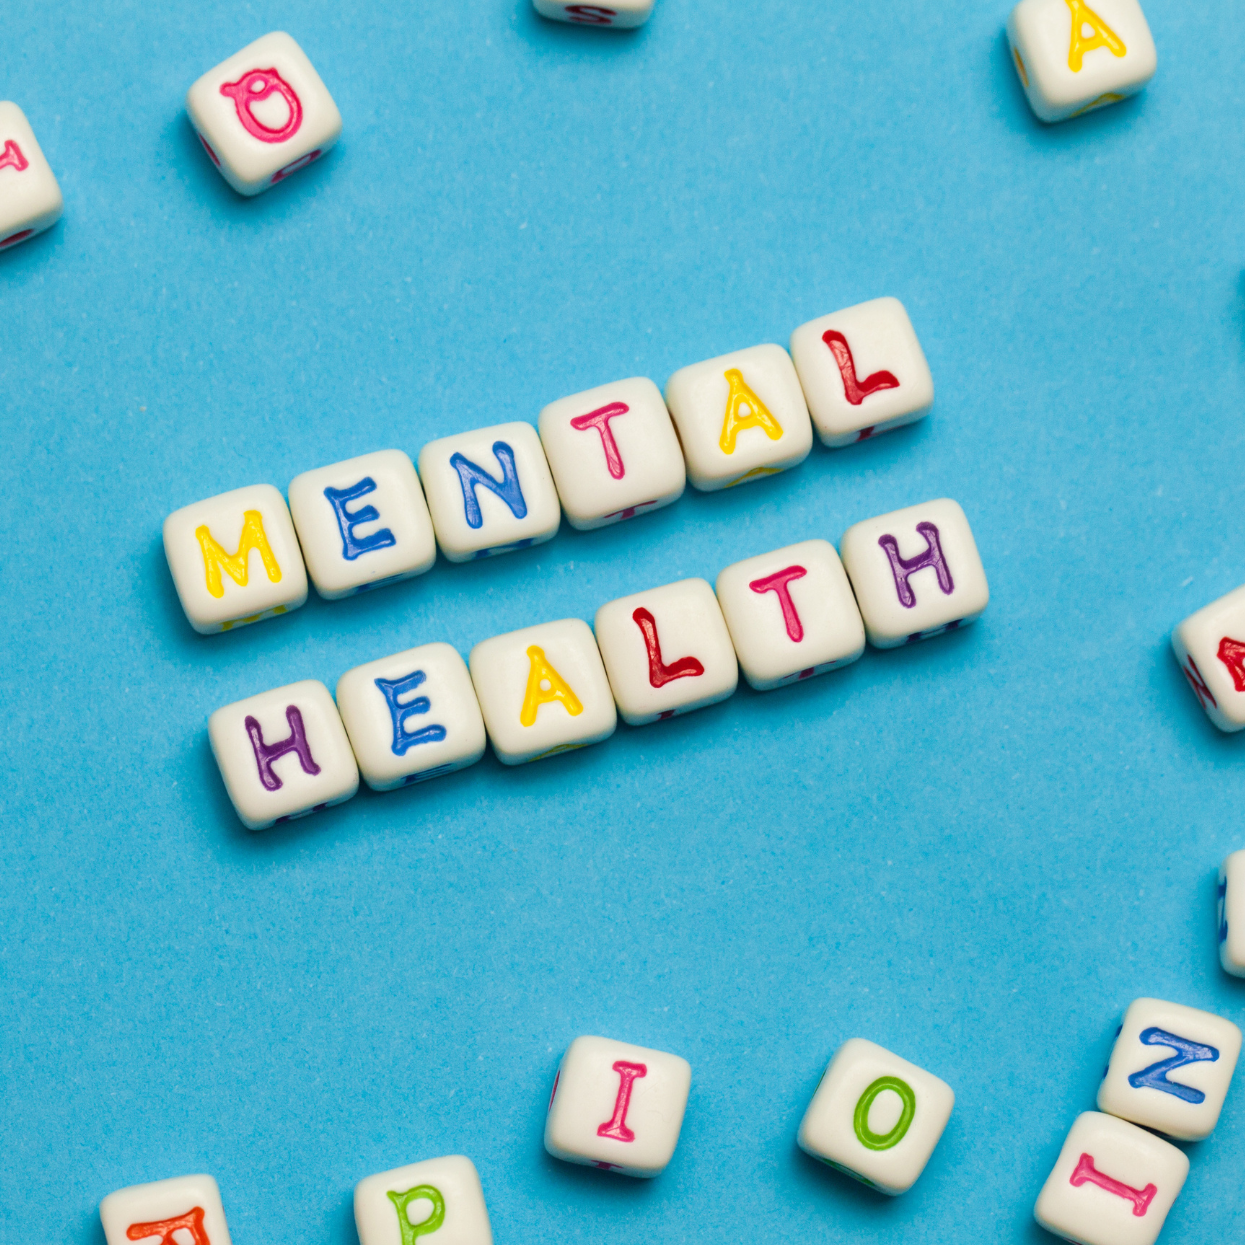 Small blocks with letters spelling out Mental Health